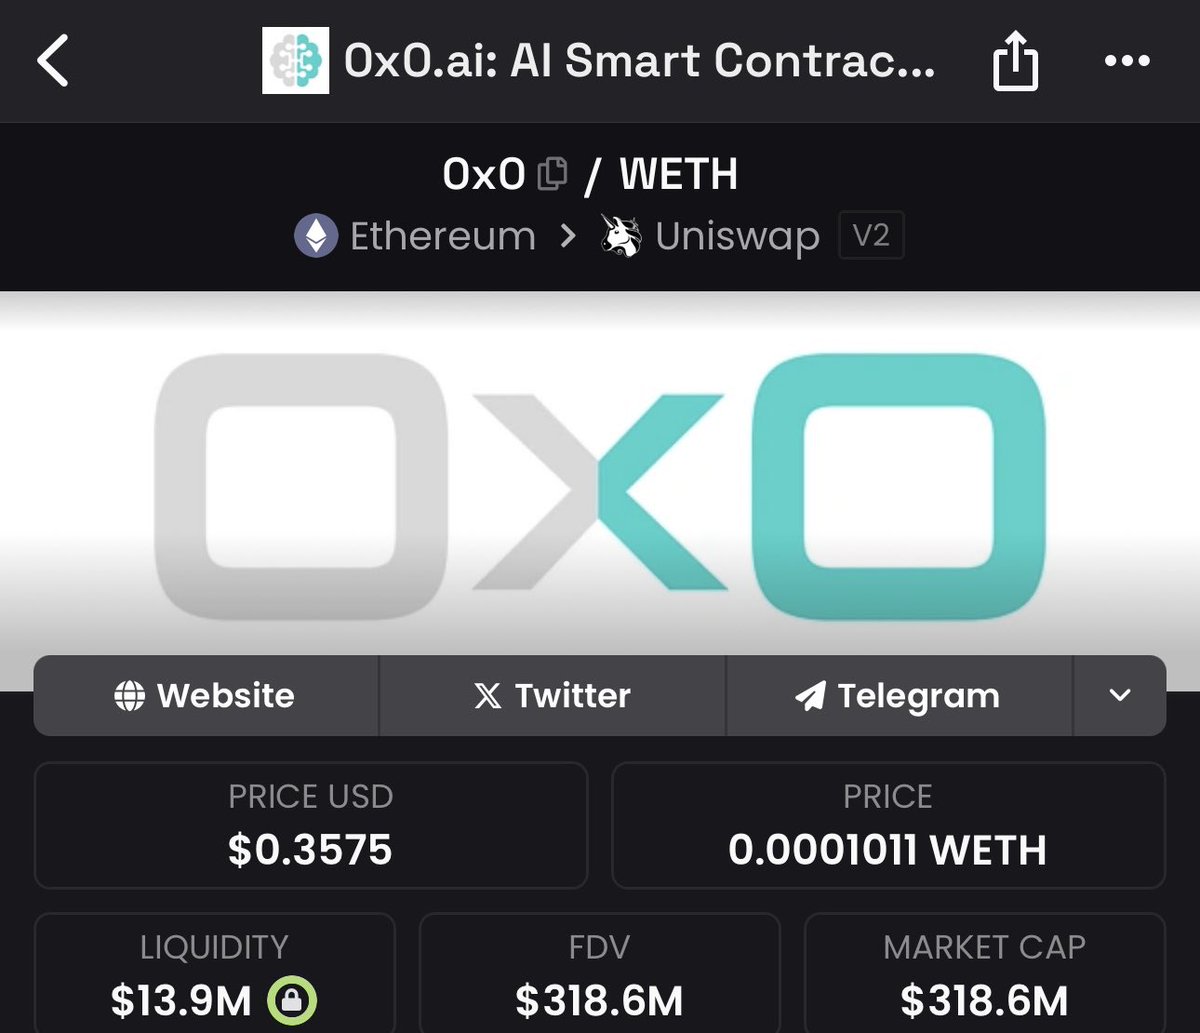 #0x0 liquidity to market cap ratio is extremely attractive for whales to buy. One of the best in all of crypto I expect once rev share increases we see many whales step in and buy 7+ fig positions to take advantage of the APR First ever AI Privacy ecosystem -to bullish on this